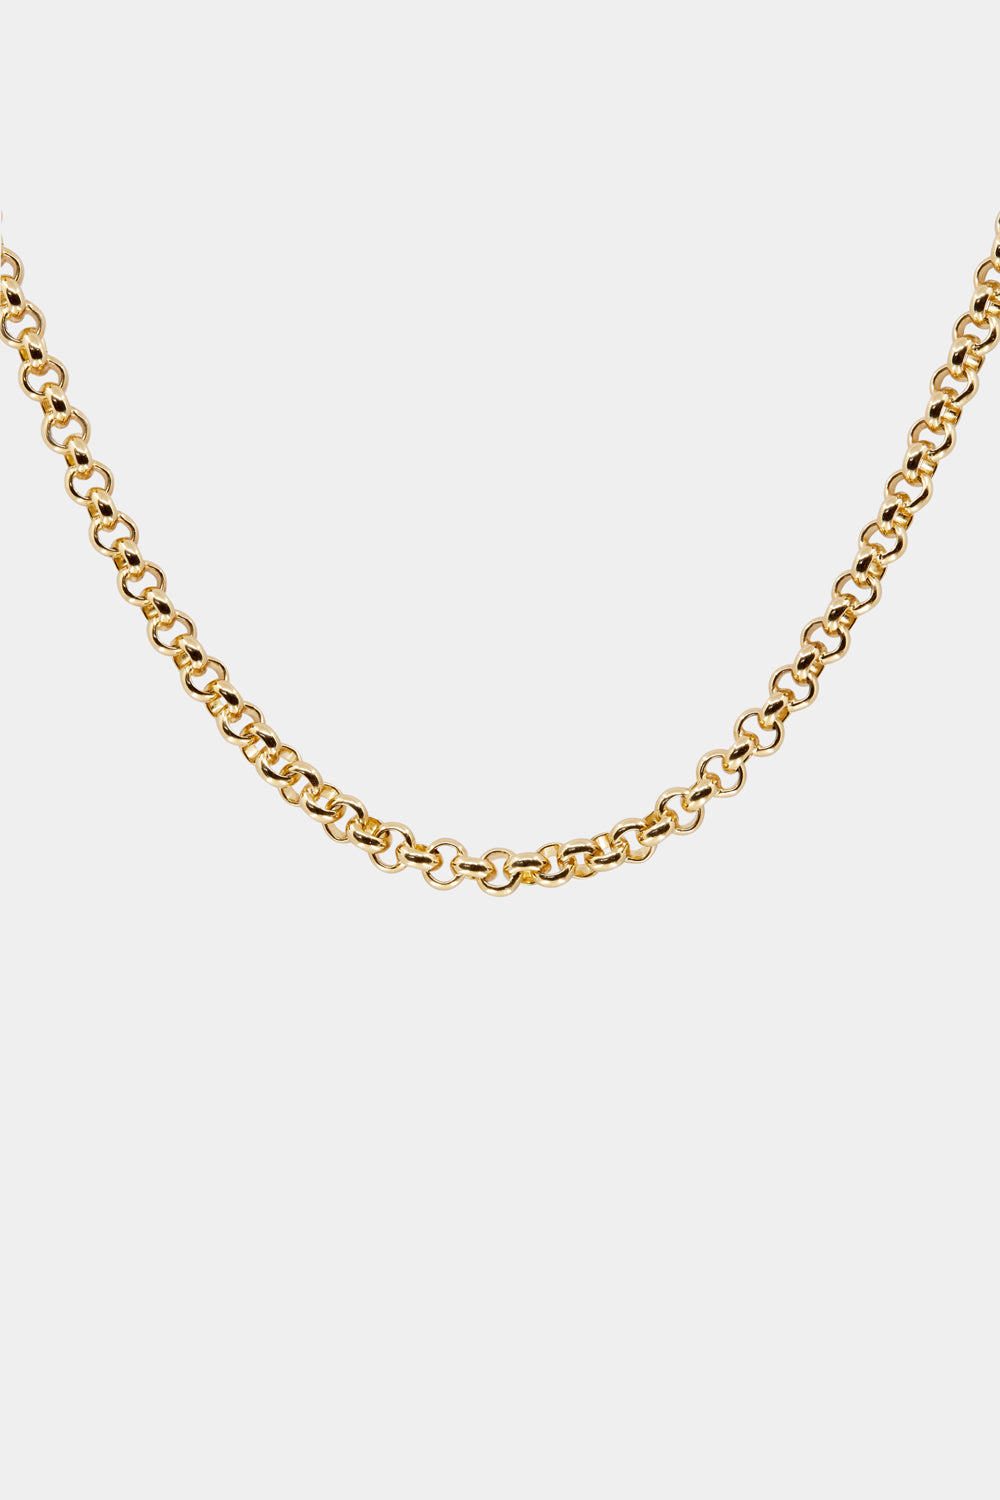 Medium Chateau Necklace | 9K Yellow Gold